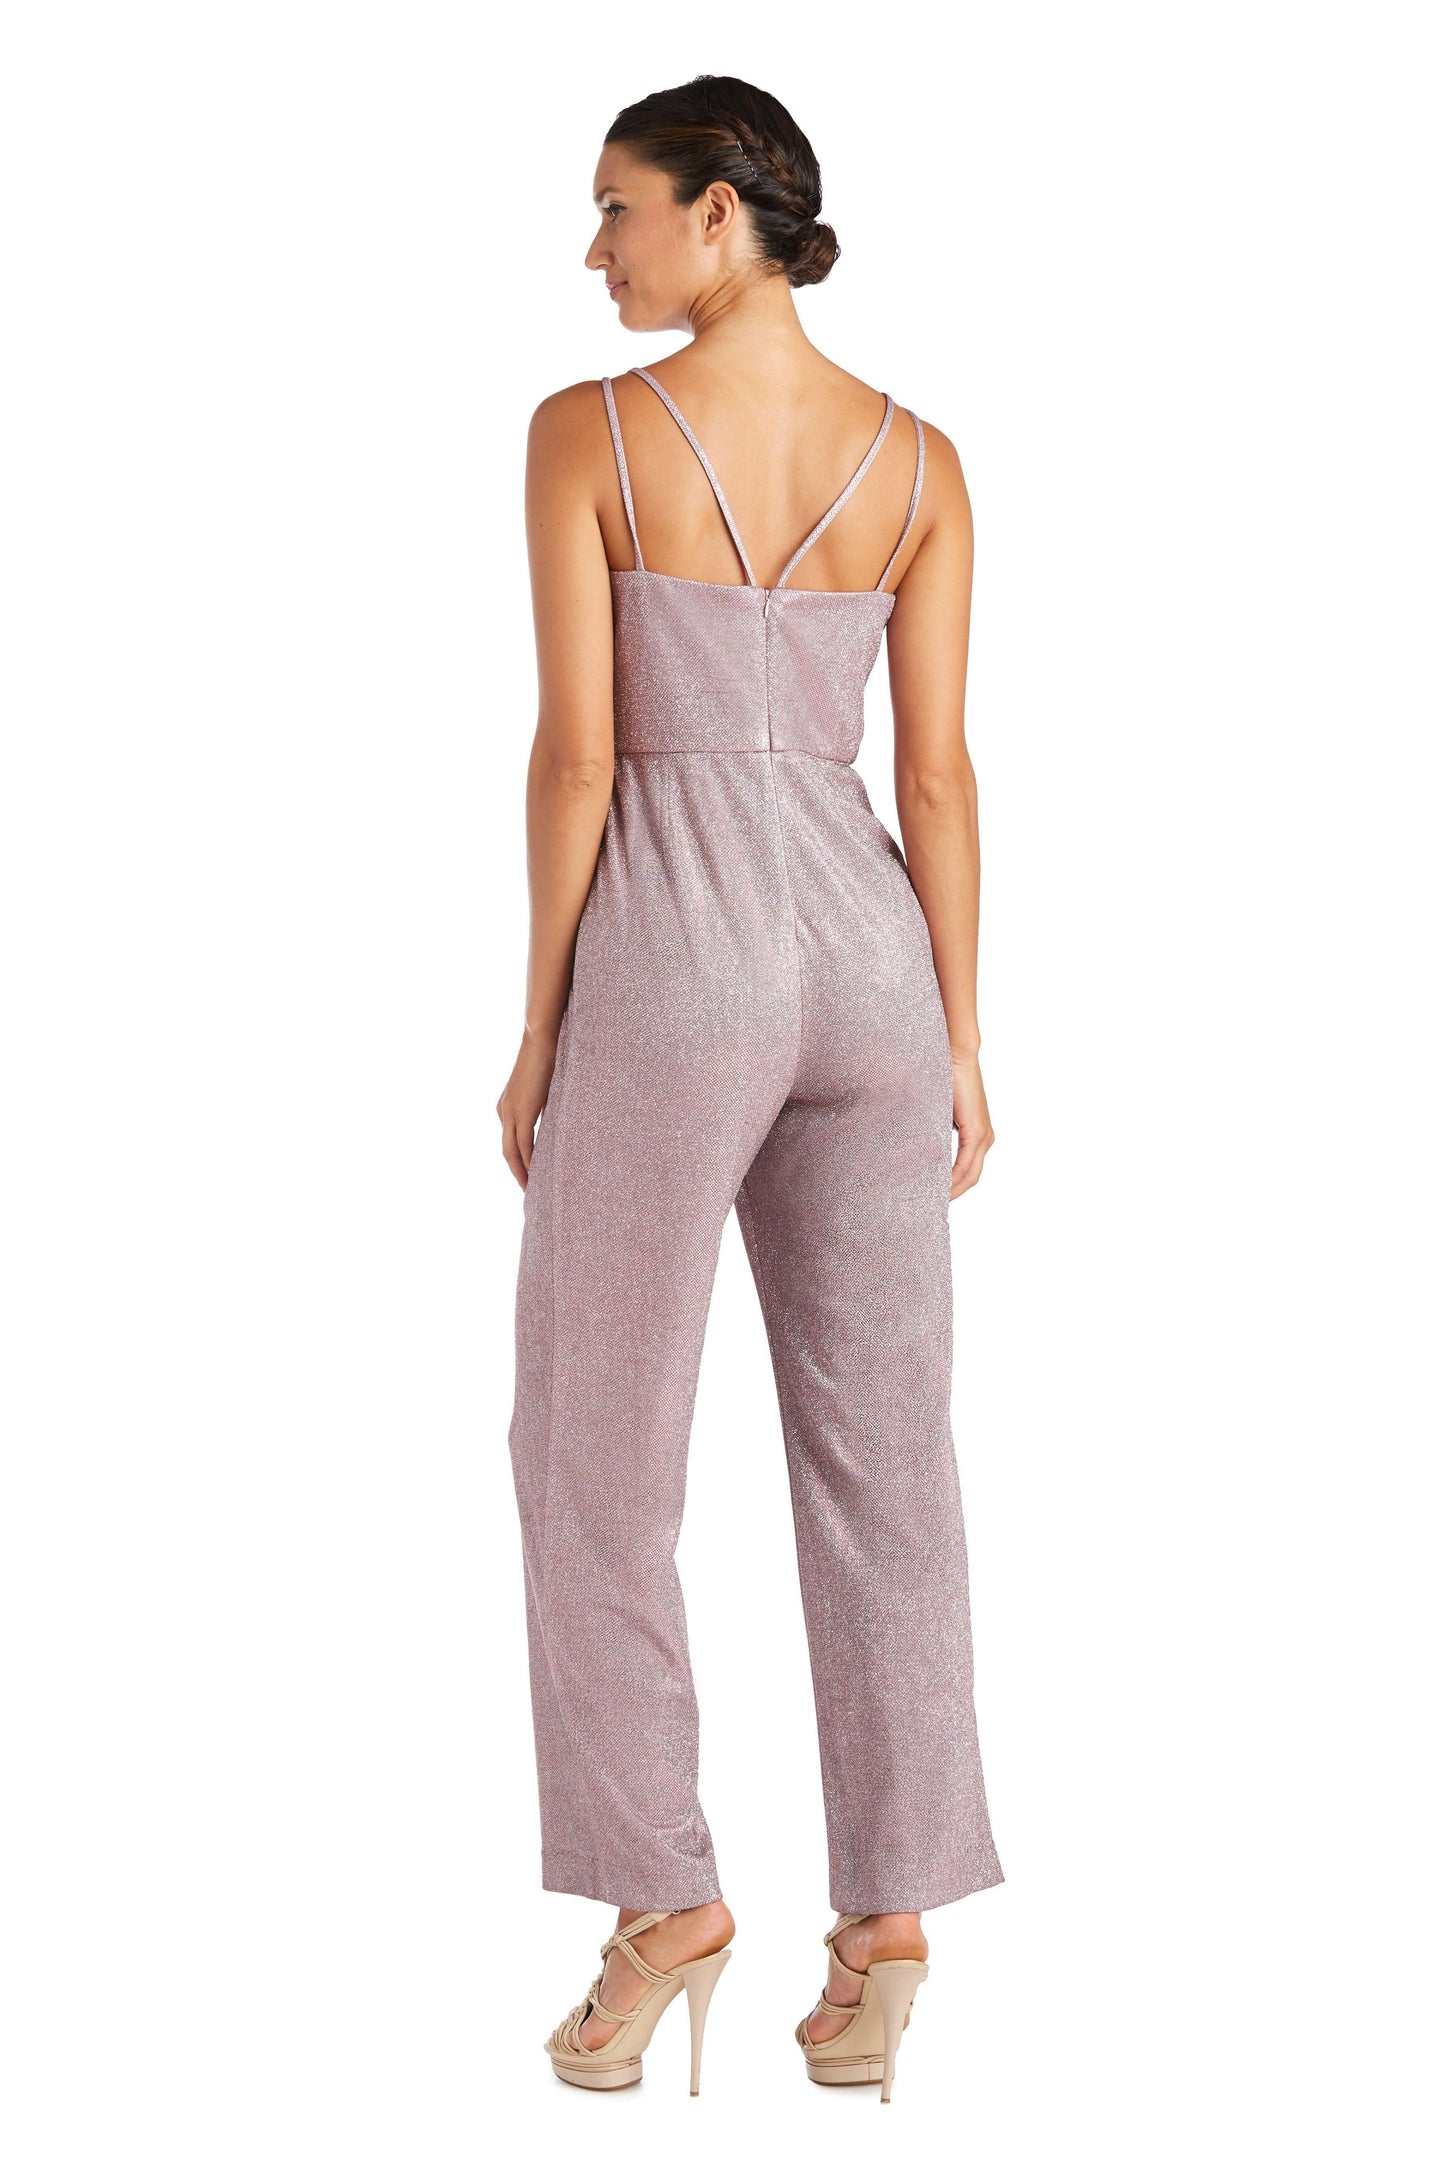 Nightway Long Formal Jumpsuit 21950 - The Dress Outlet